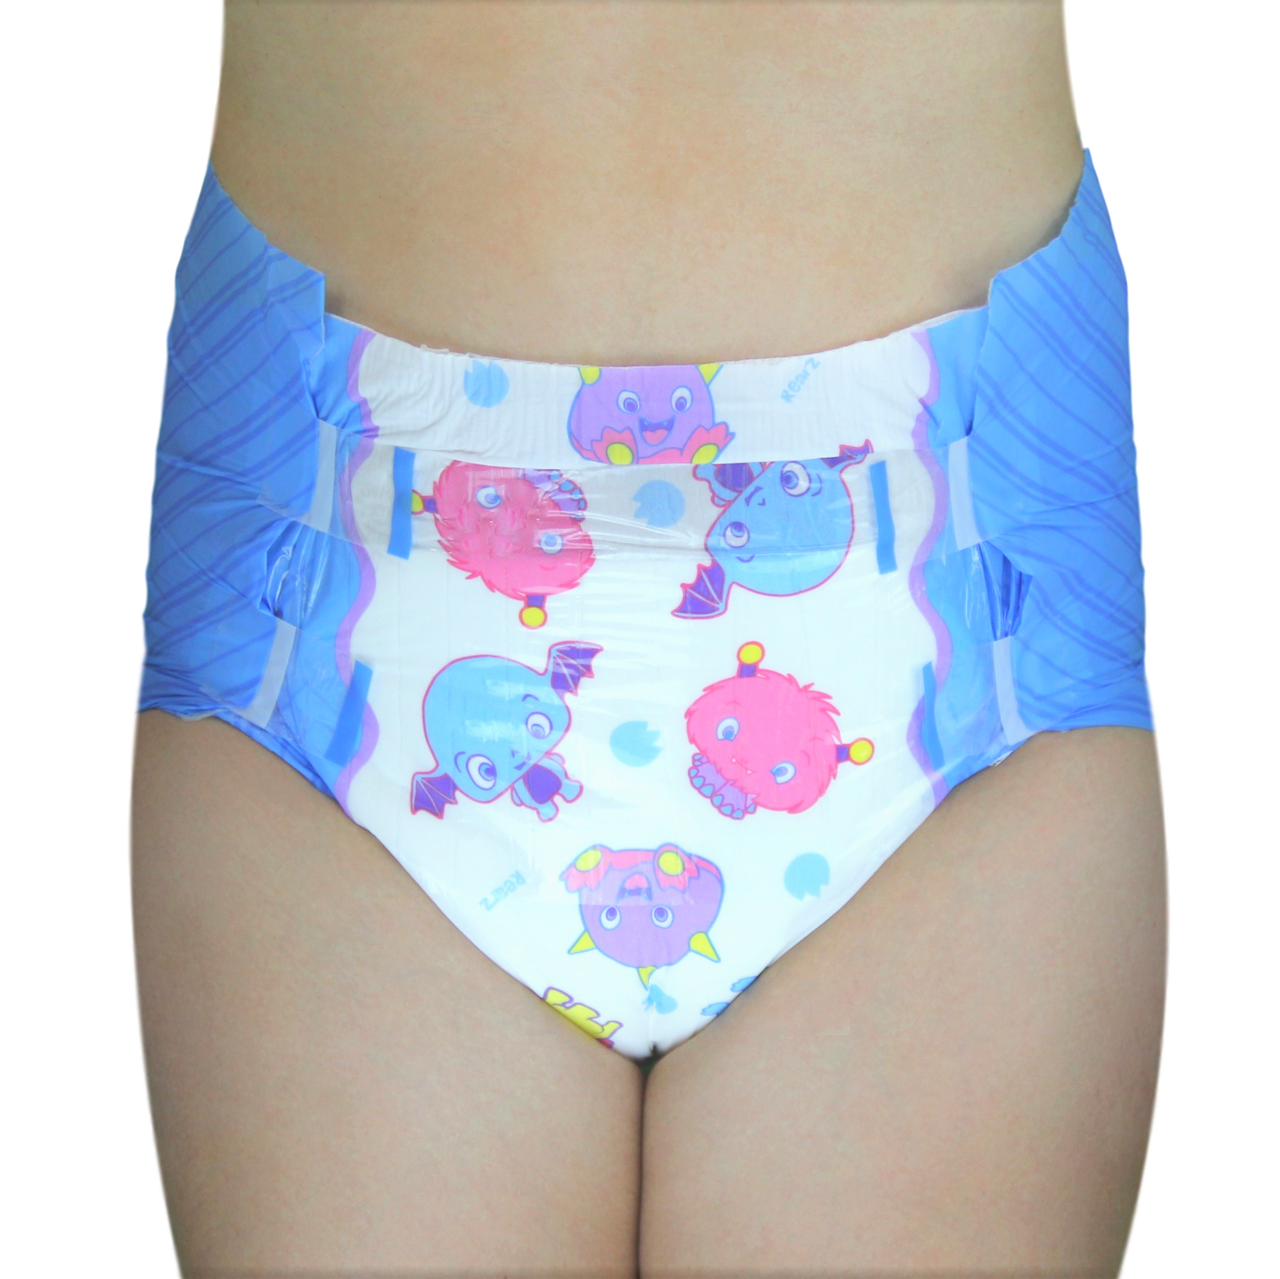 Rearz Lil Monsters Adult Nappies - Downunder Care